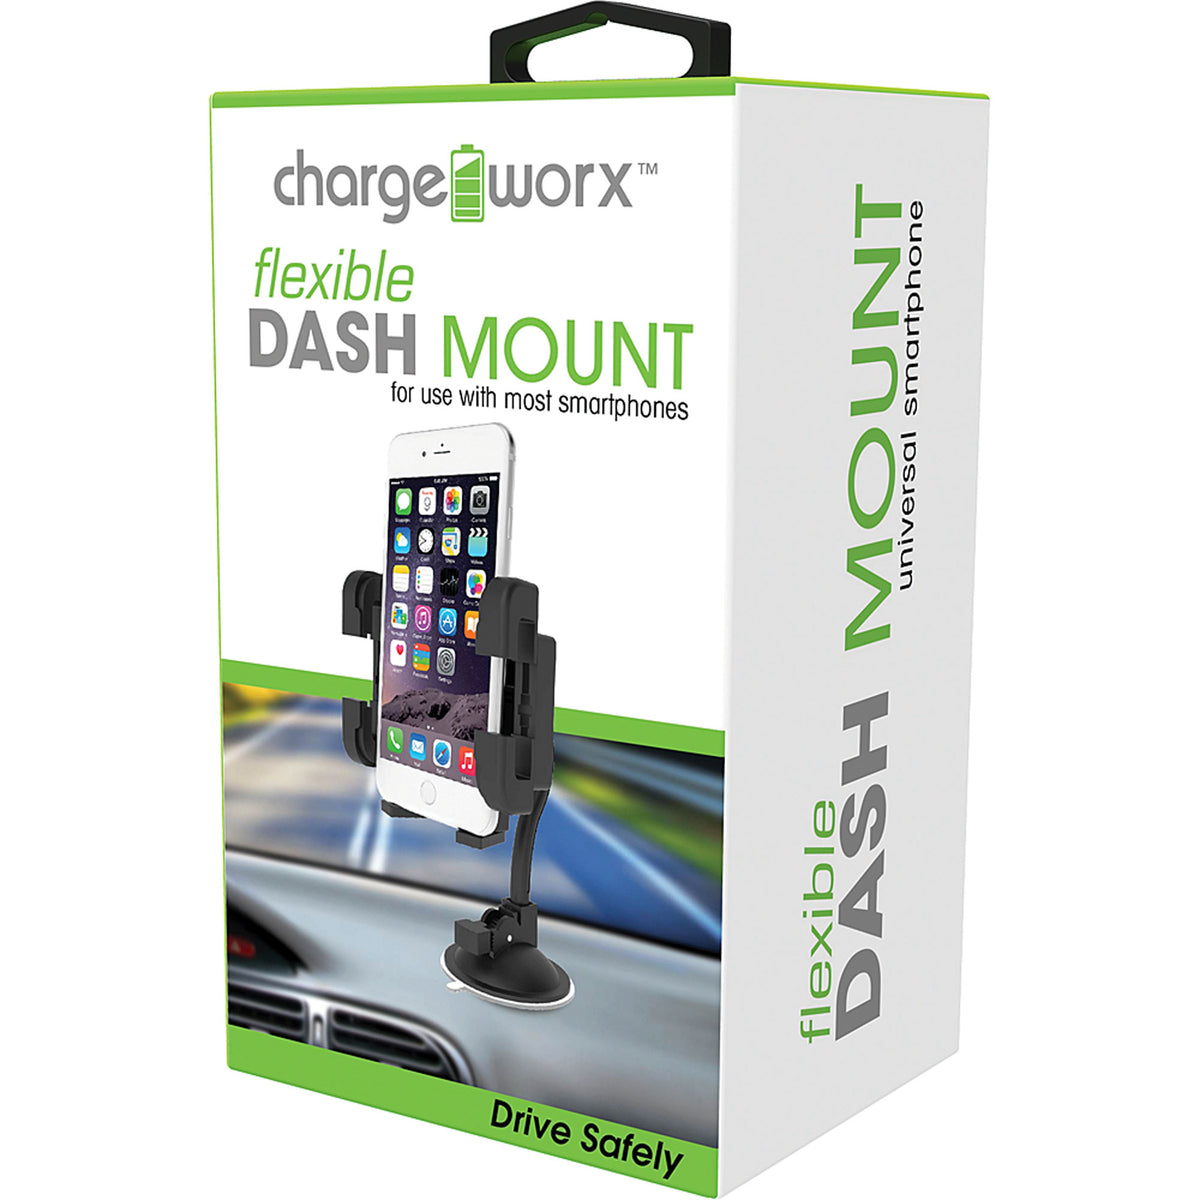 Chargeworx CX9904BK Dash Mount for use with most smartphones